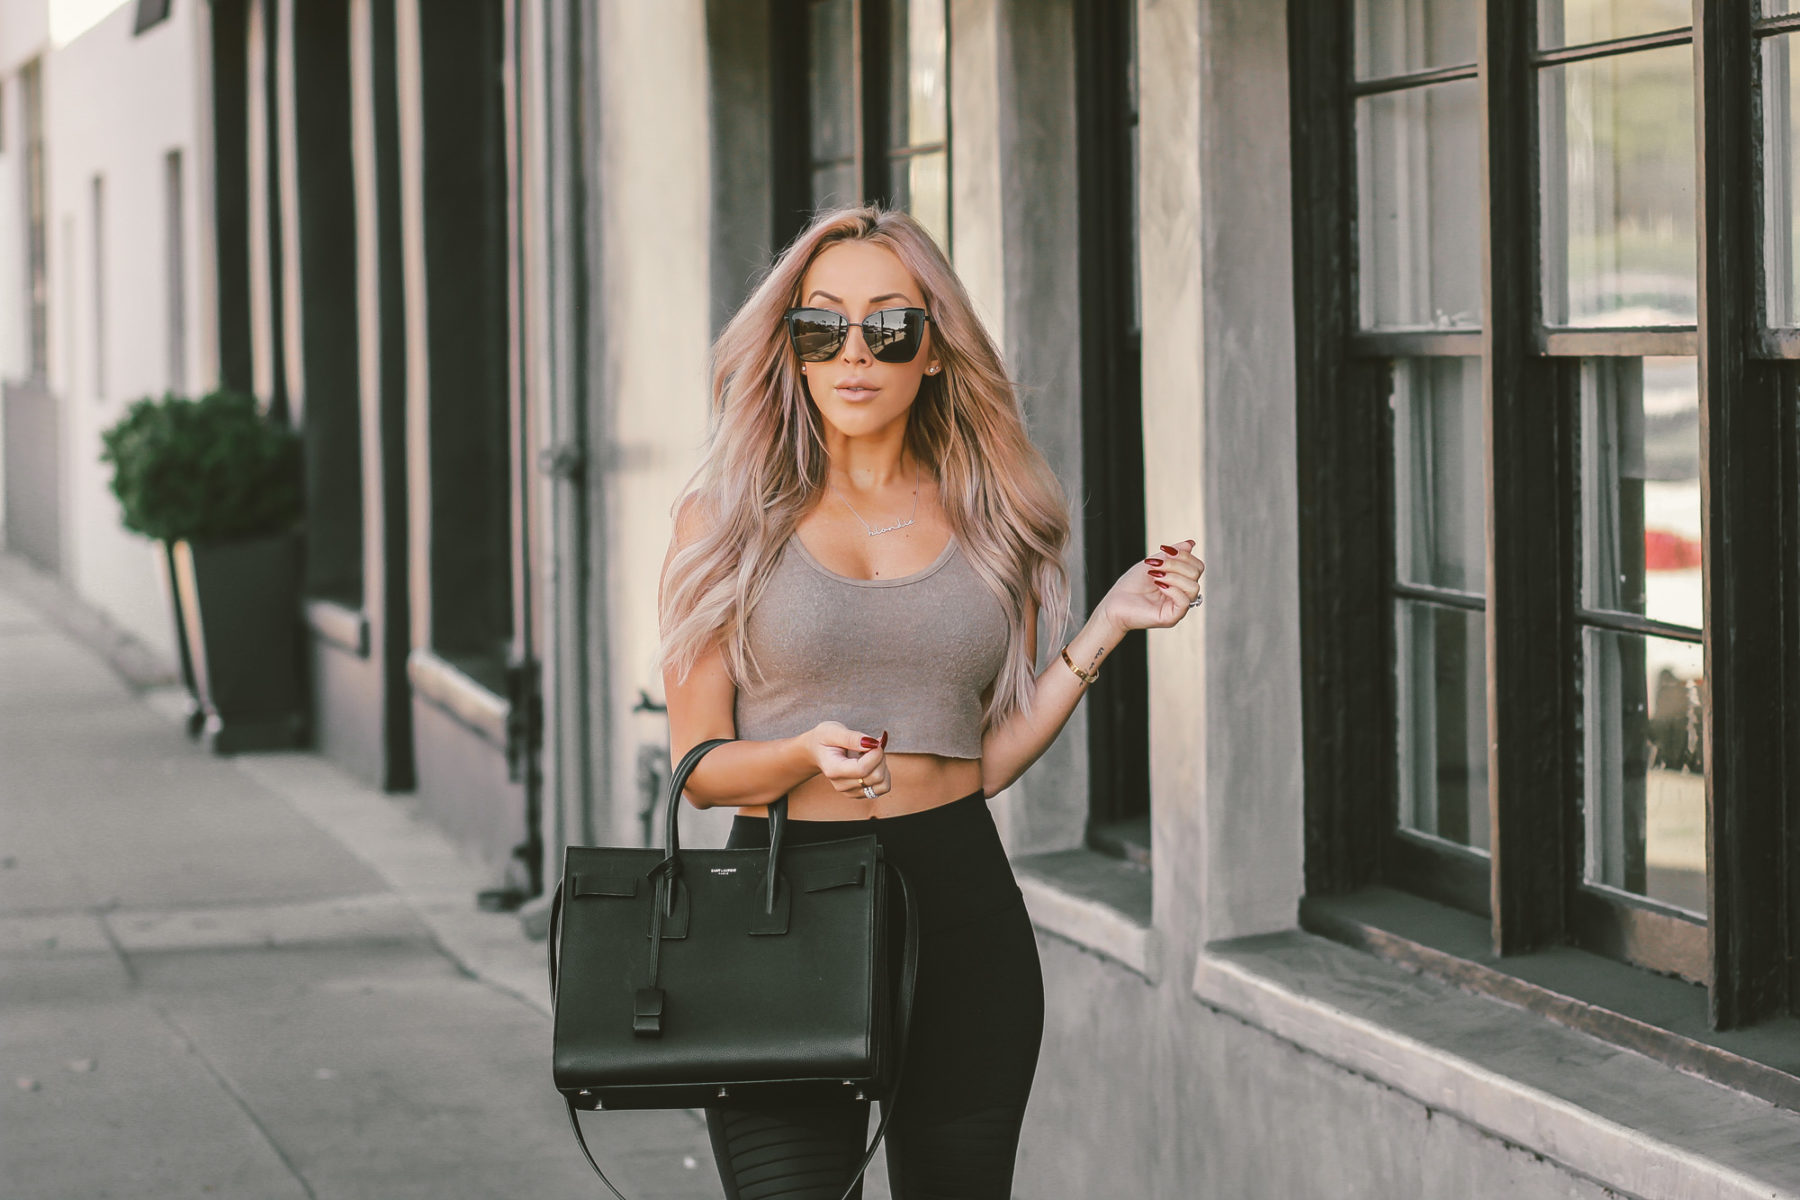 How To Style Your Yoga Outfit & Wear It Out | All Yoga | Moto Leggings | Saint Laurent Sac De Jour | Diff Eyewear | Blondie in the City by Hayley Larue